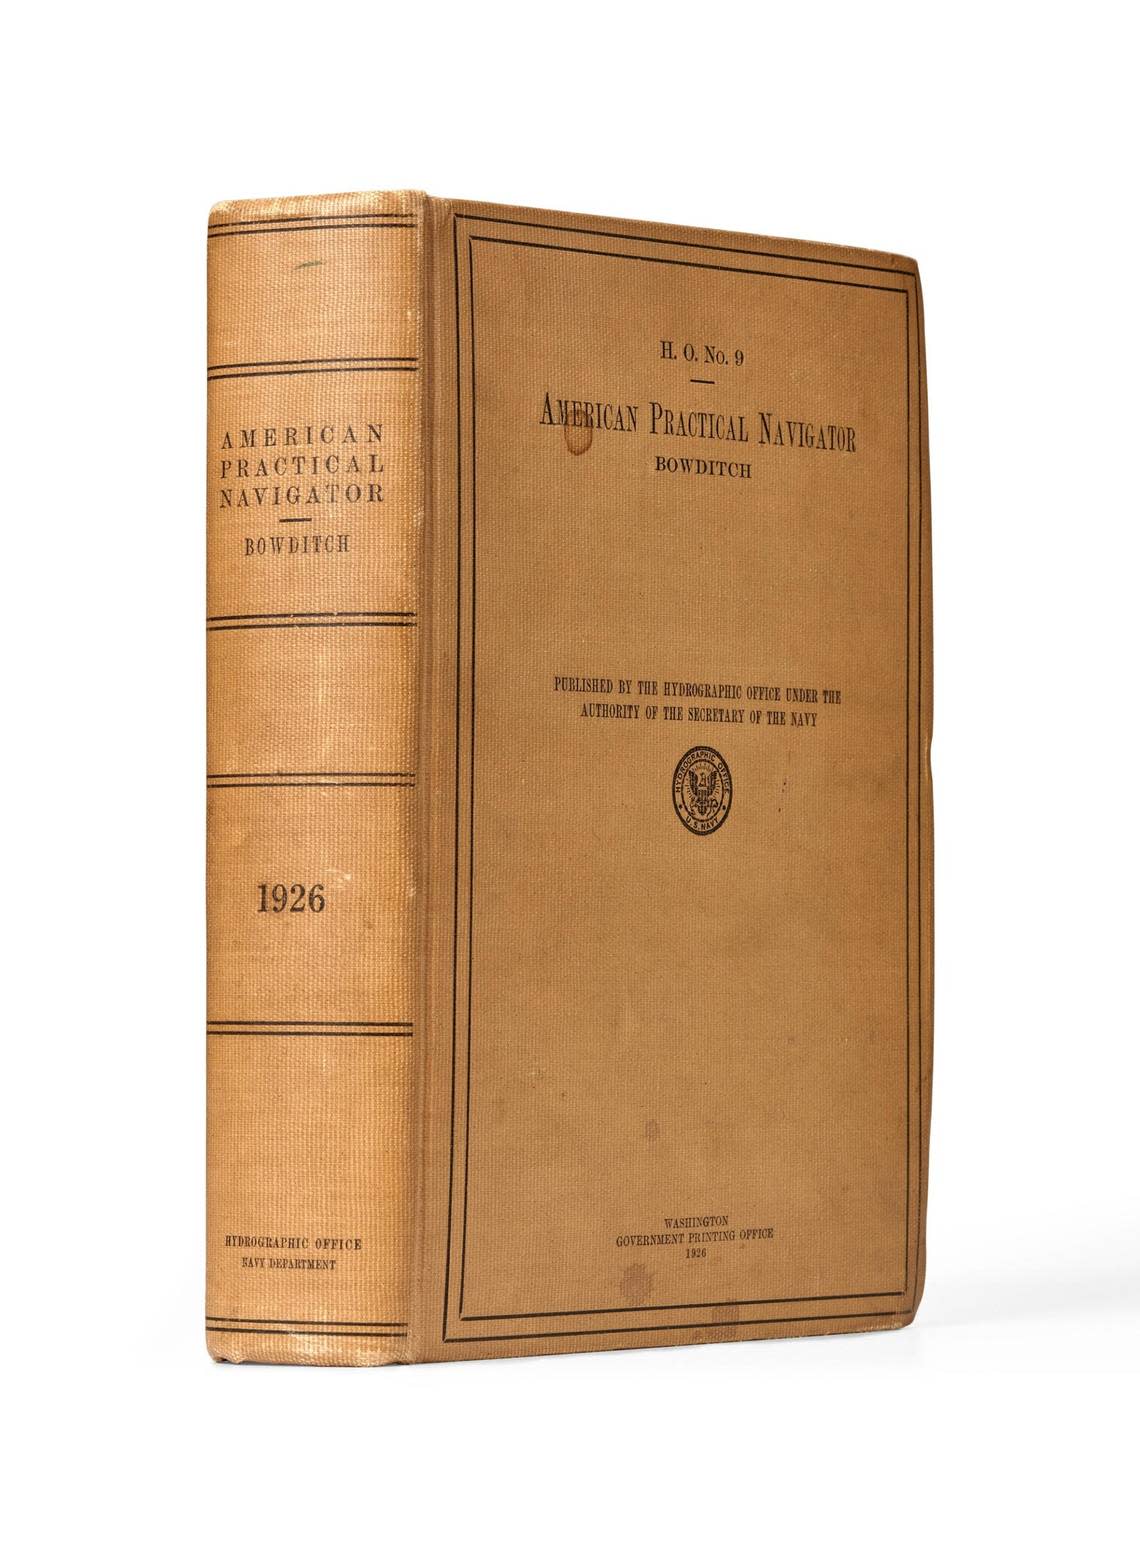 A copy of “The American Practical Navigator” by Nathaniel Bowditch, an encyclopedia of navigation, with annotations and notes by Amelia Earhart, will be auctioned. It has an estimated value of $10,000 to $15,000, making it one of the priciest items. Courtesy Bonhams